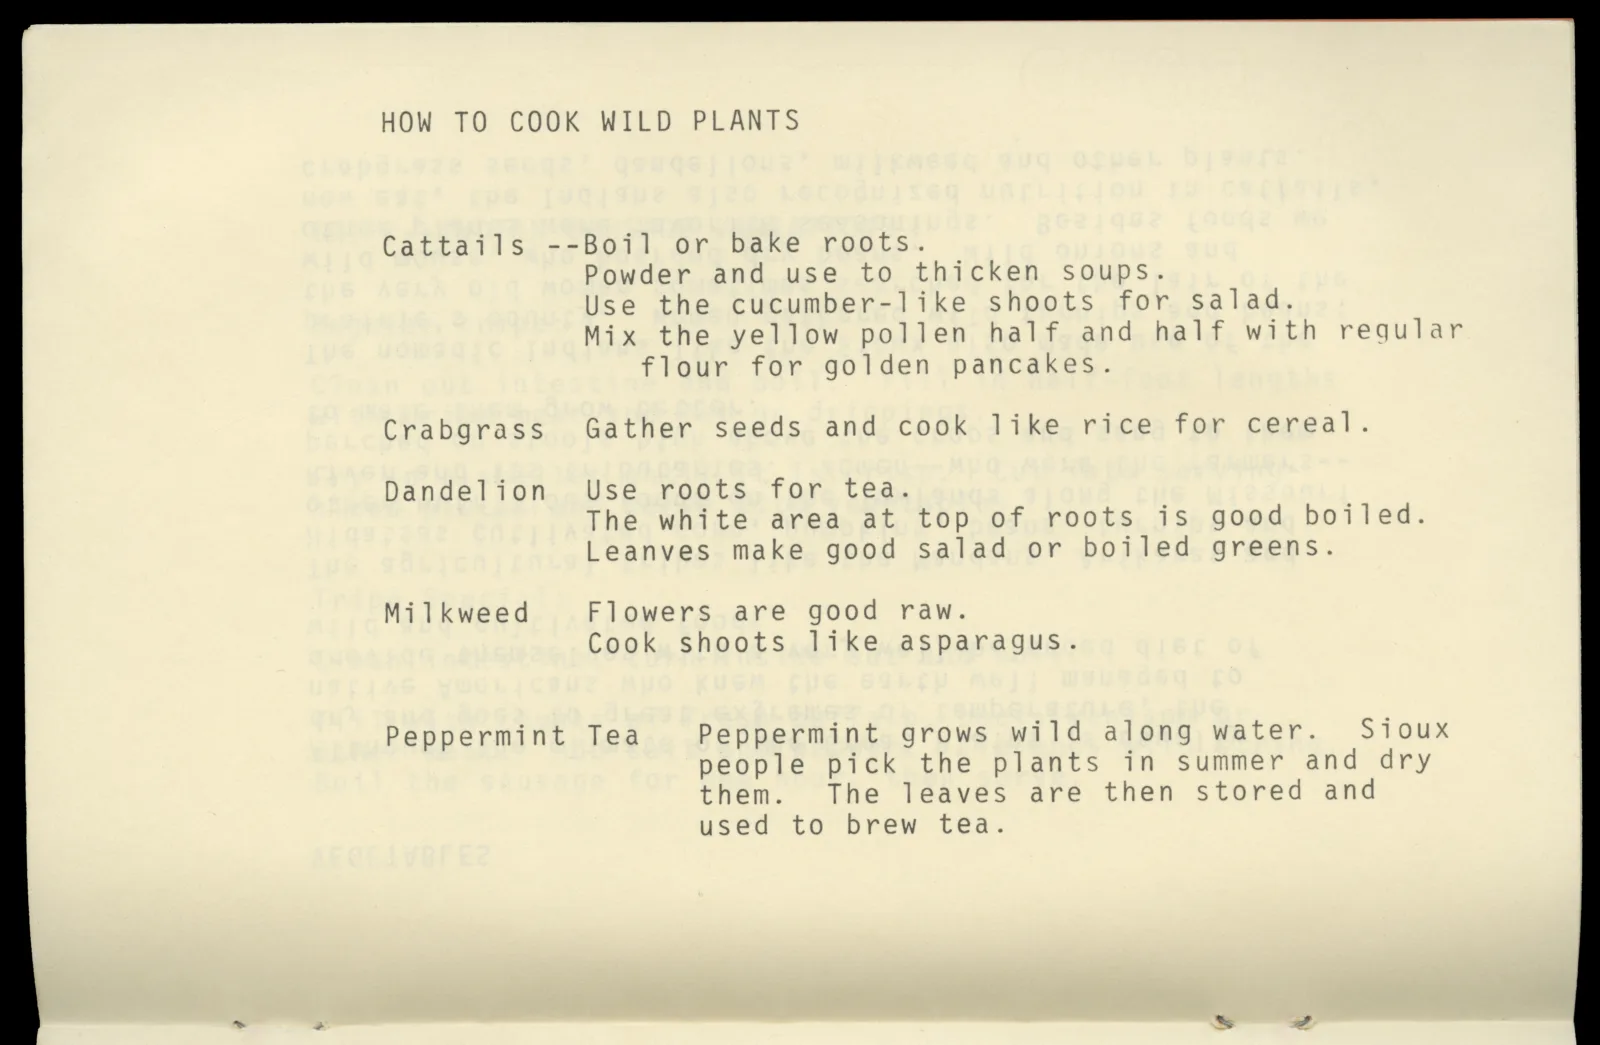 Typed text that reads: "How to cook wild plants. Cattails--boil or bake roots. Powder and use to thicken soups. Use the cucumber-like shoots for salad. Mix the yellow pollen half and half with regular flour for golden pancakes. Crabgrass--gather seeds and cook like rice for cereal. Dandelion--use roots for tea. The white area at top of roots is good boiled. Leaves make good salad or boiled greens. Milkweed--Flowers are good raw. Cook shoots like asparagus. Peppermint tea--peppermint grows wild along water. Sioux people pick the plants in summer and dry them. The leaves are then stored and used to brew tea."